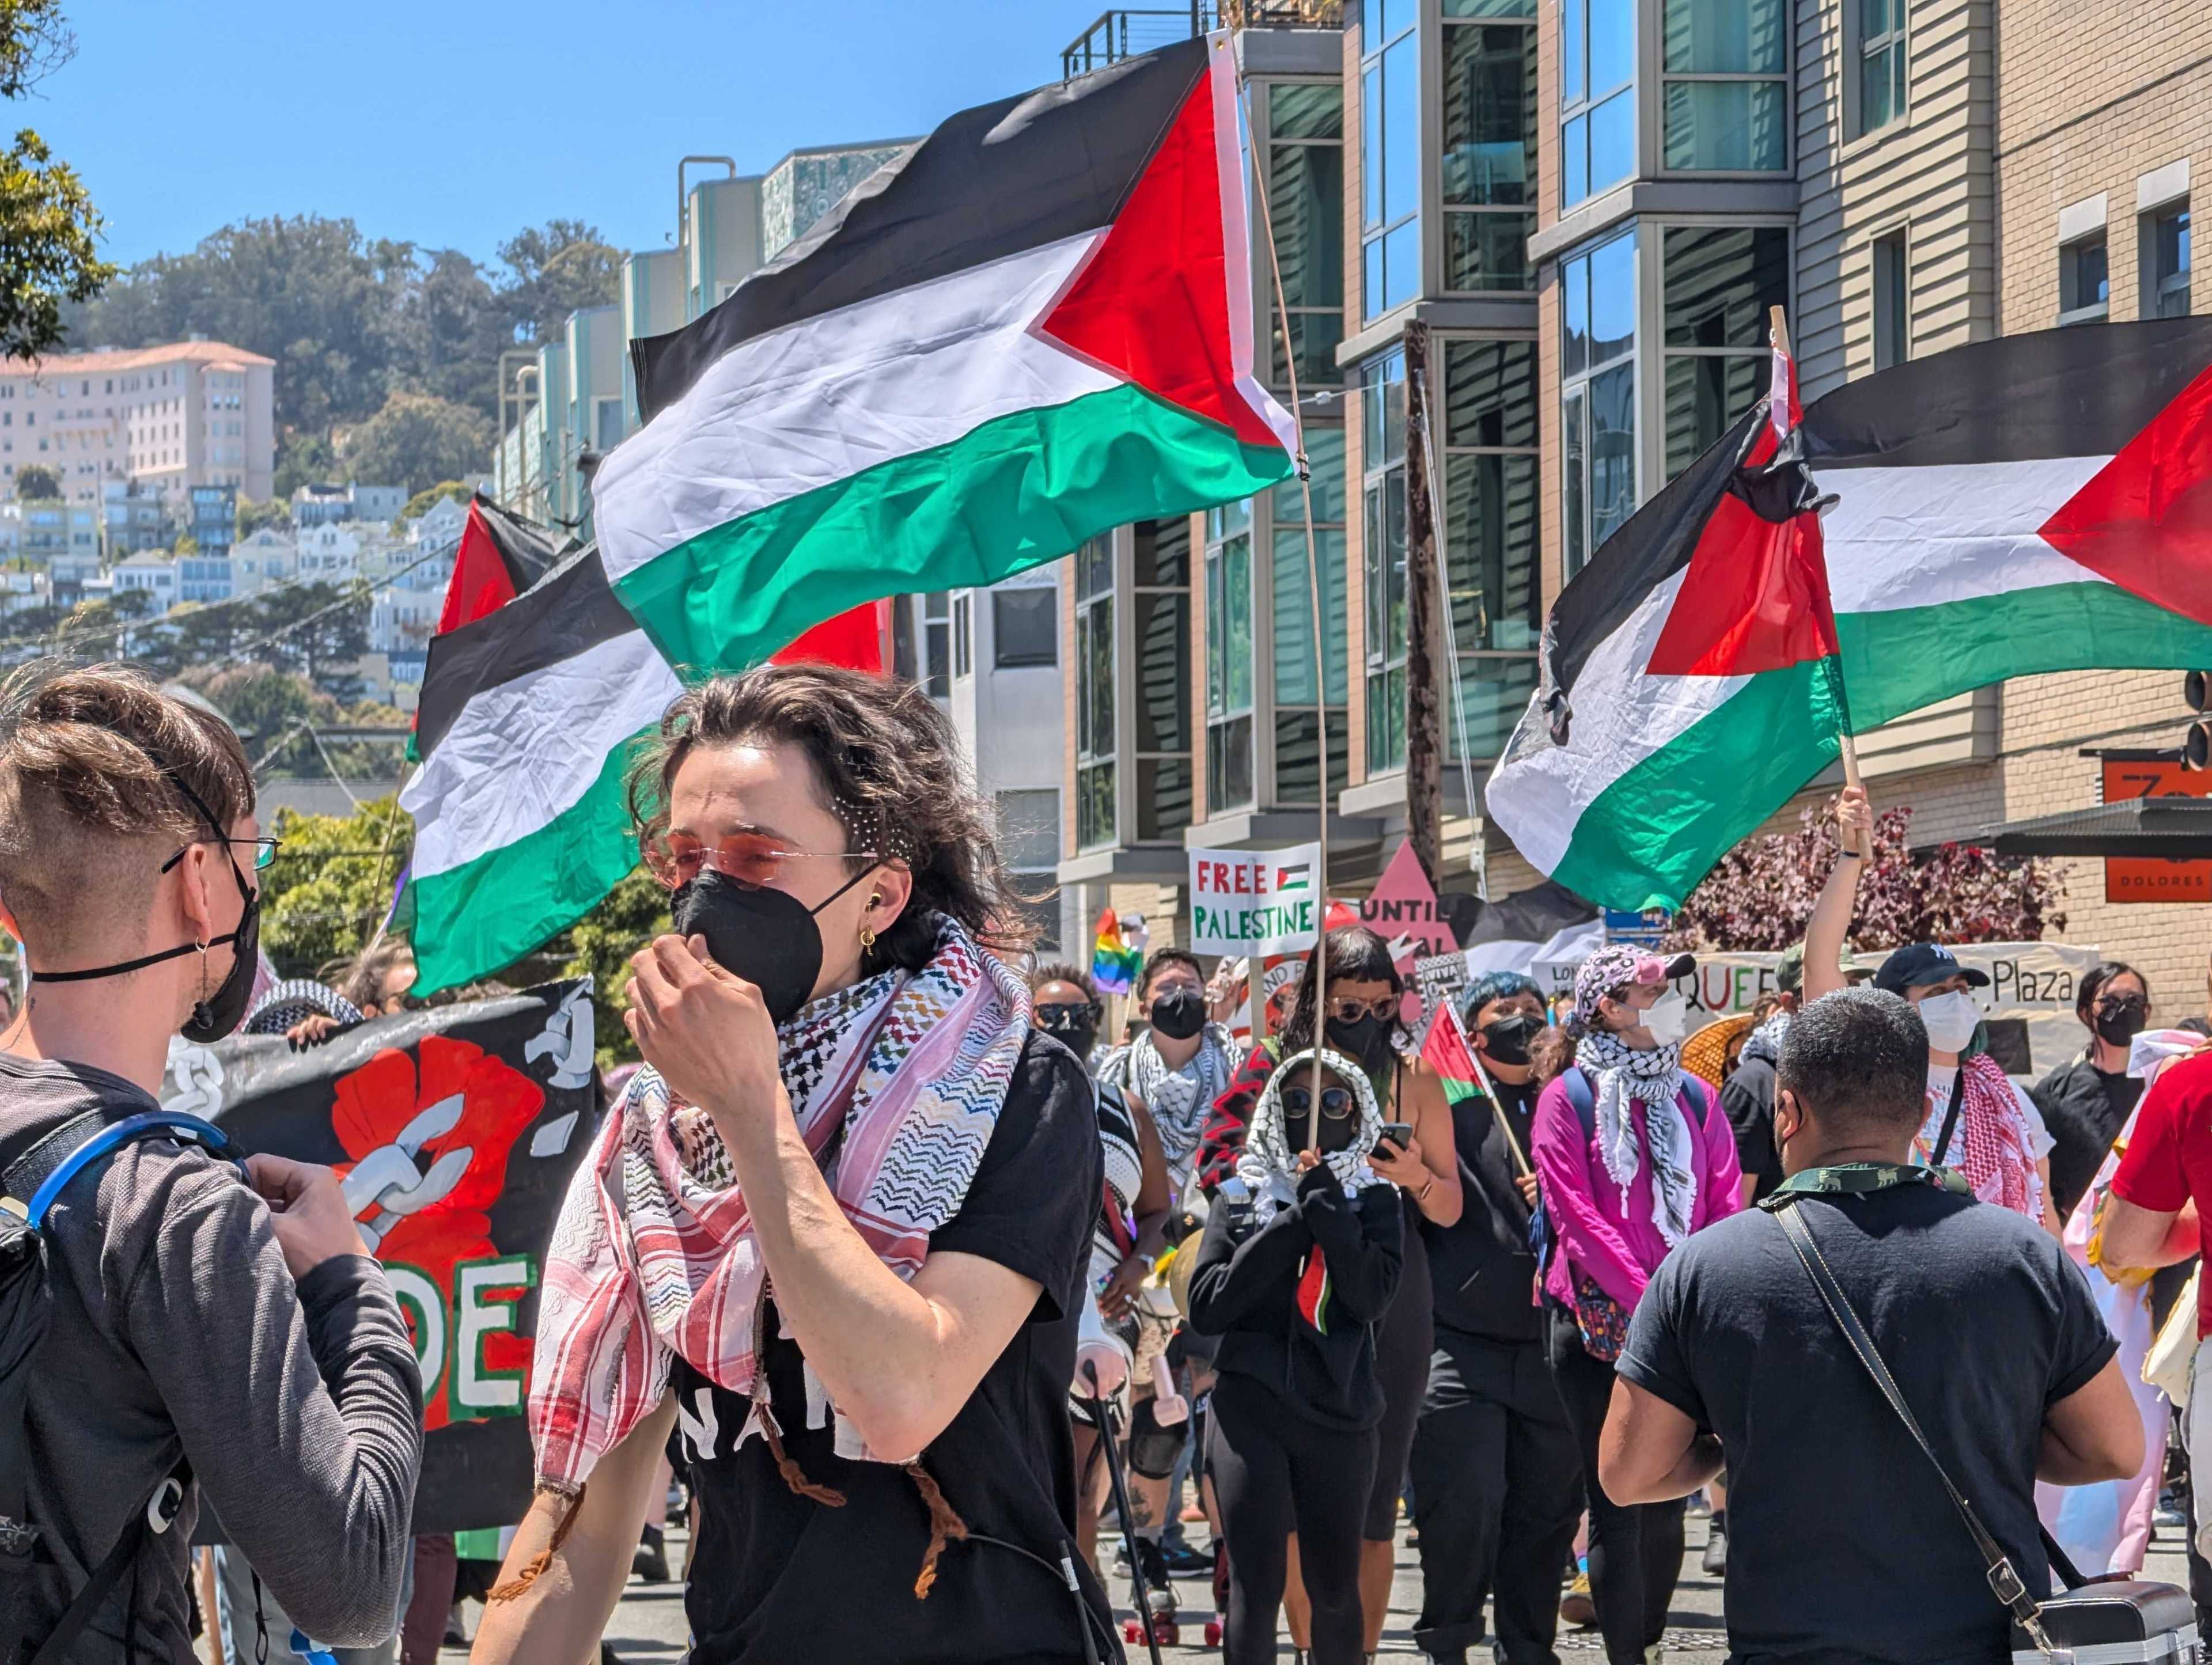 The image shows a protest with people holding Palestinian flags and wearing masks. There are signs with messages like &quot;Free Palestine.&quot; Urban buildings and hills are in the background.